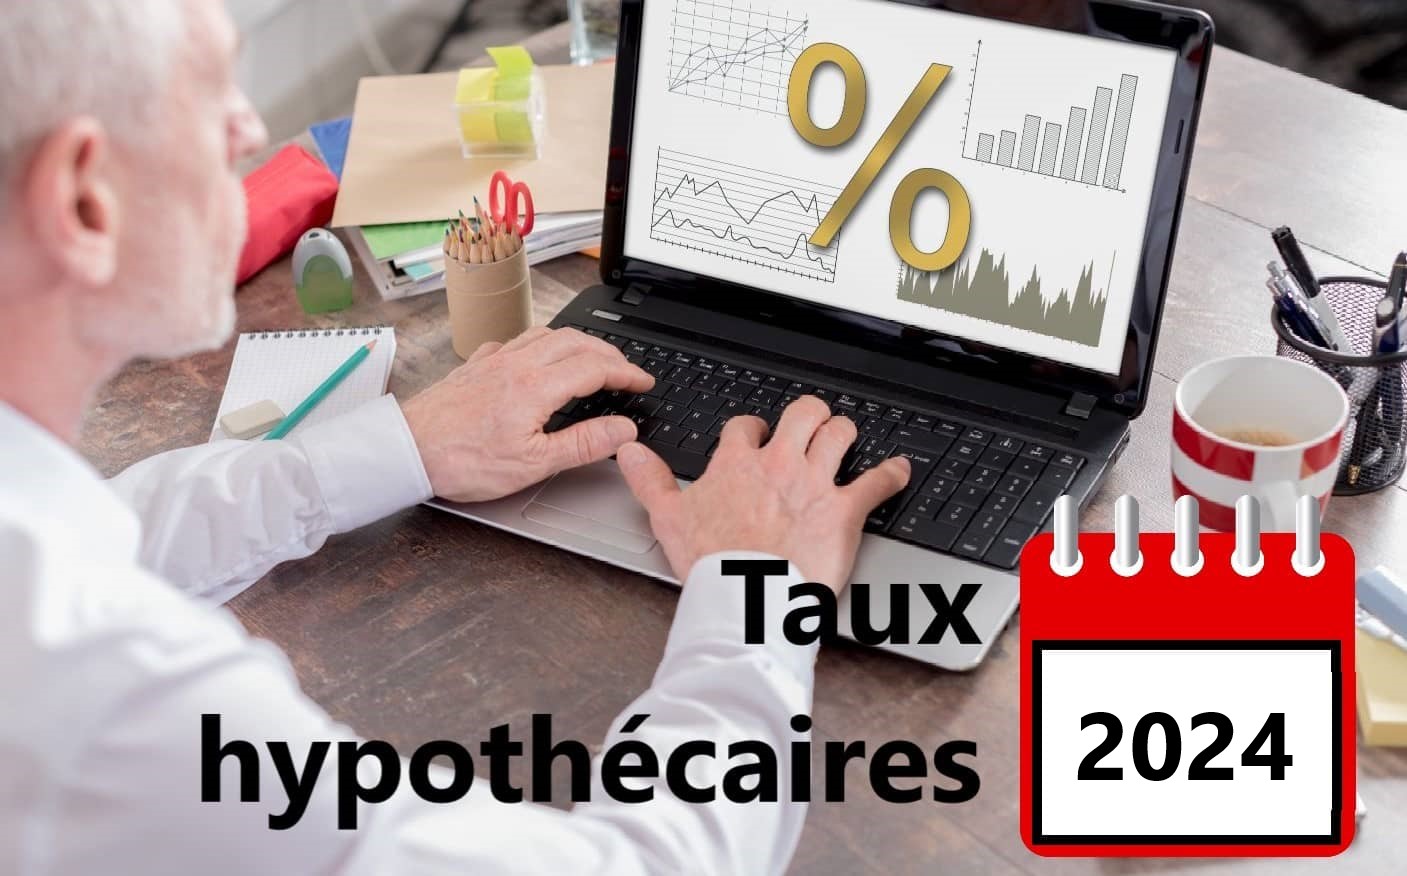 taux hypothecaires 2024